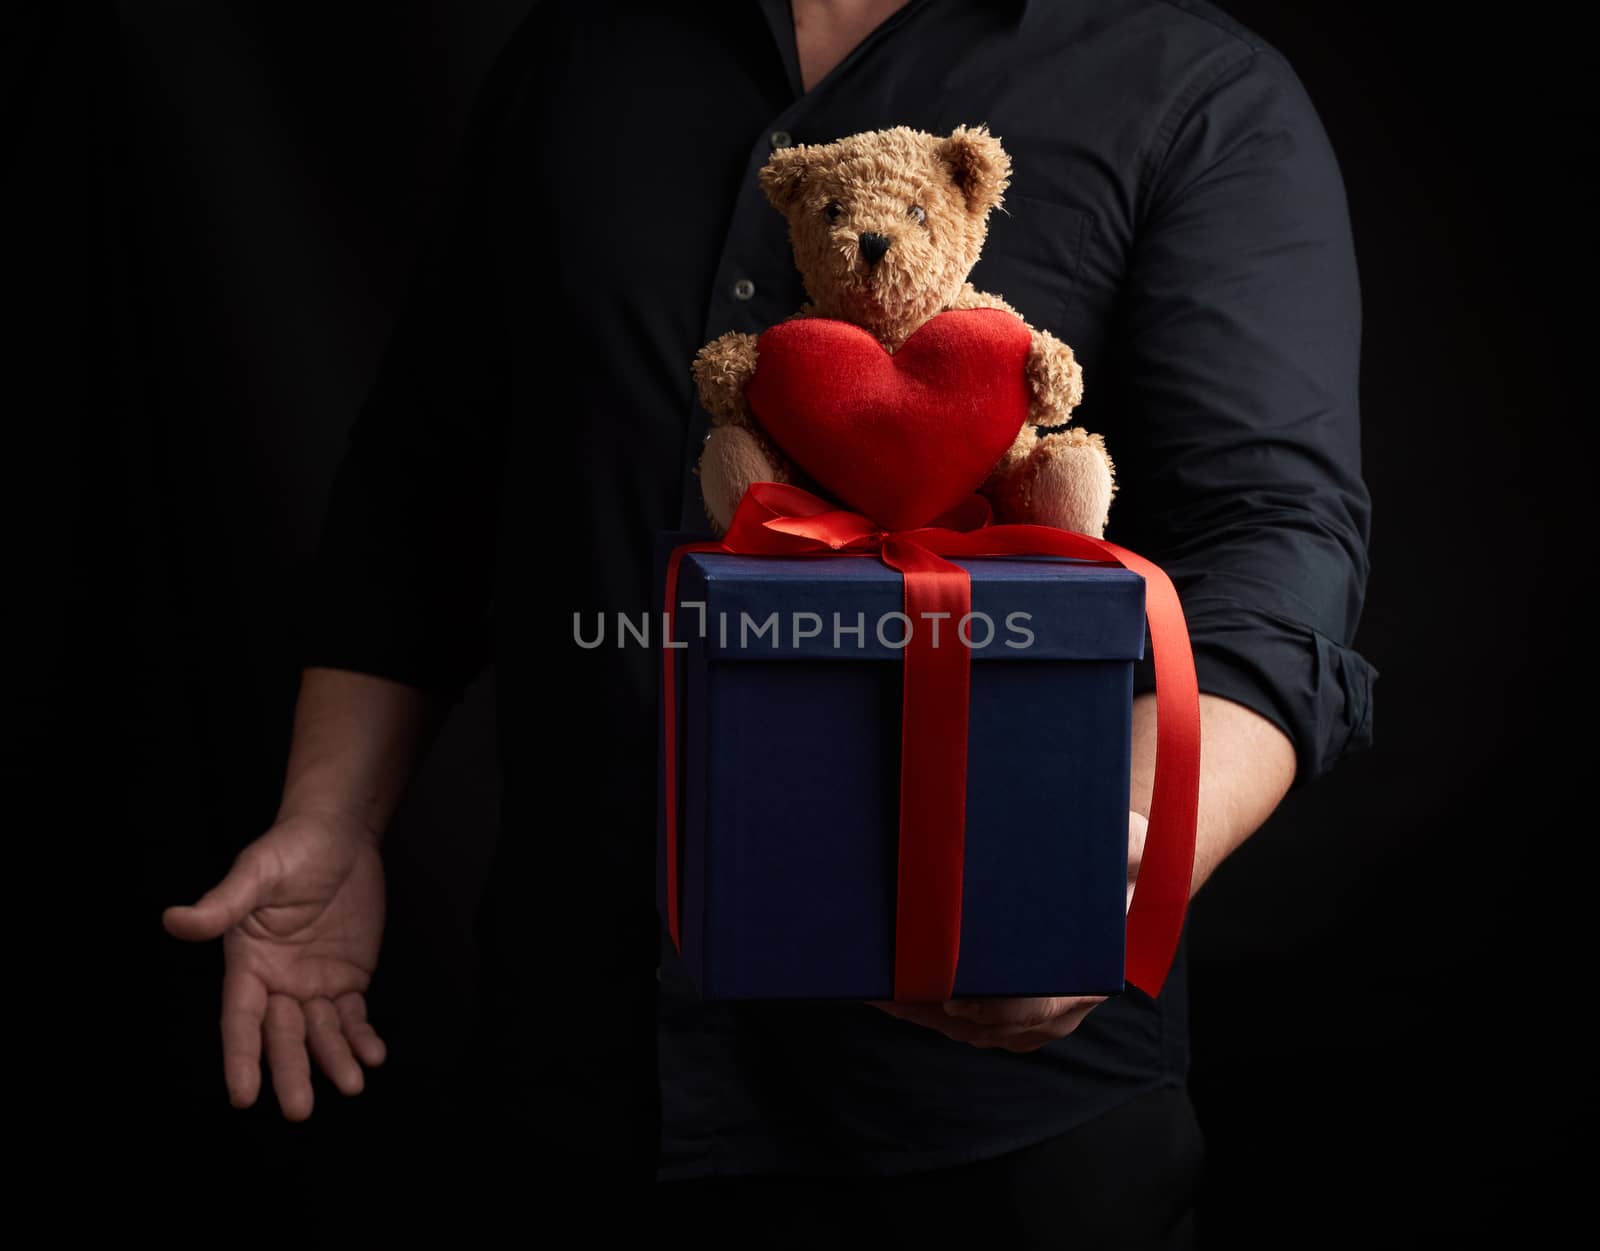 adult man in a black shirt holds a blue square box tied with a red ribbon and sits on top of a brown teddy bear with a heart, concept of congratulations on Valentine's Day on February 14